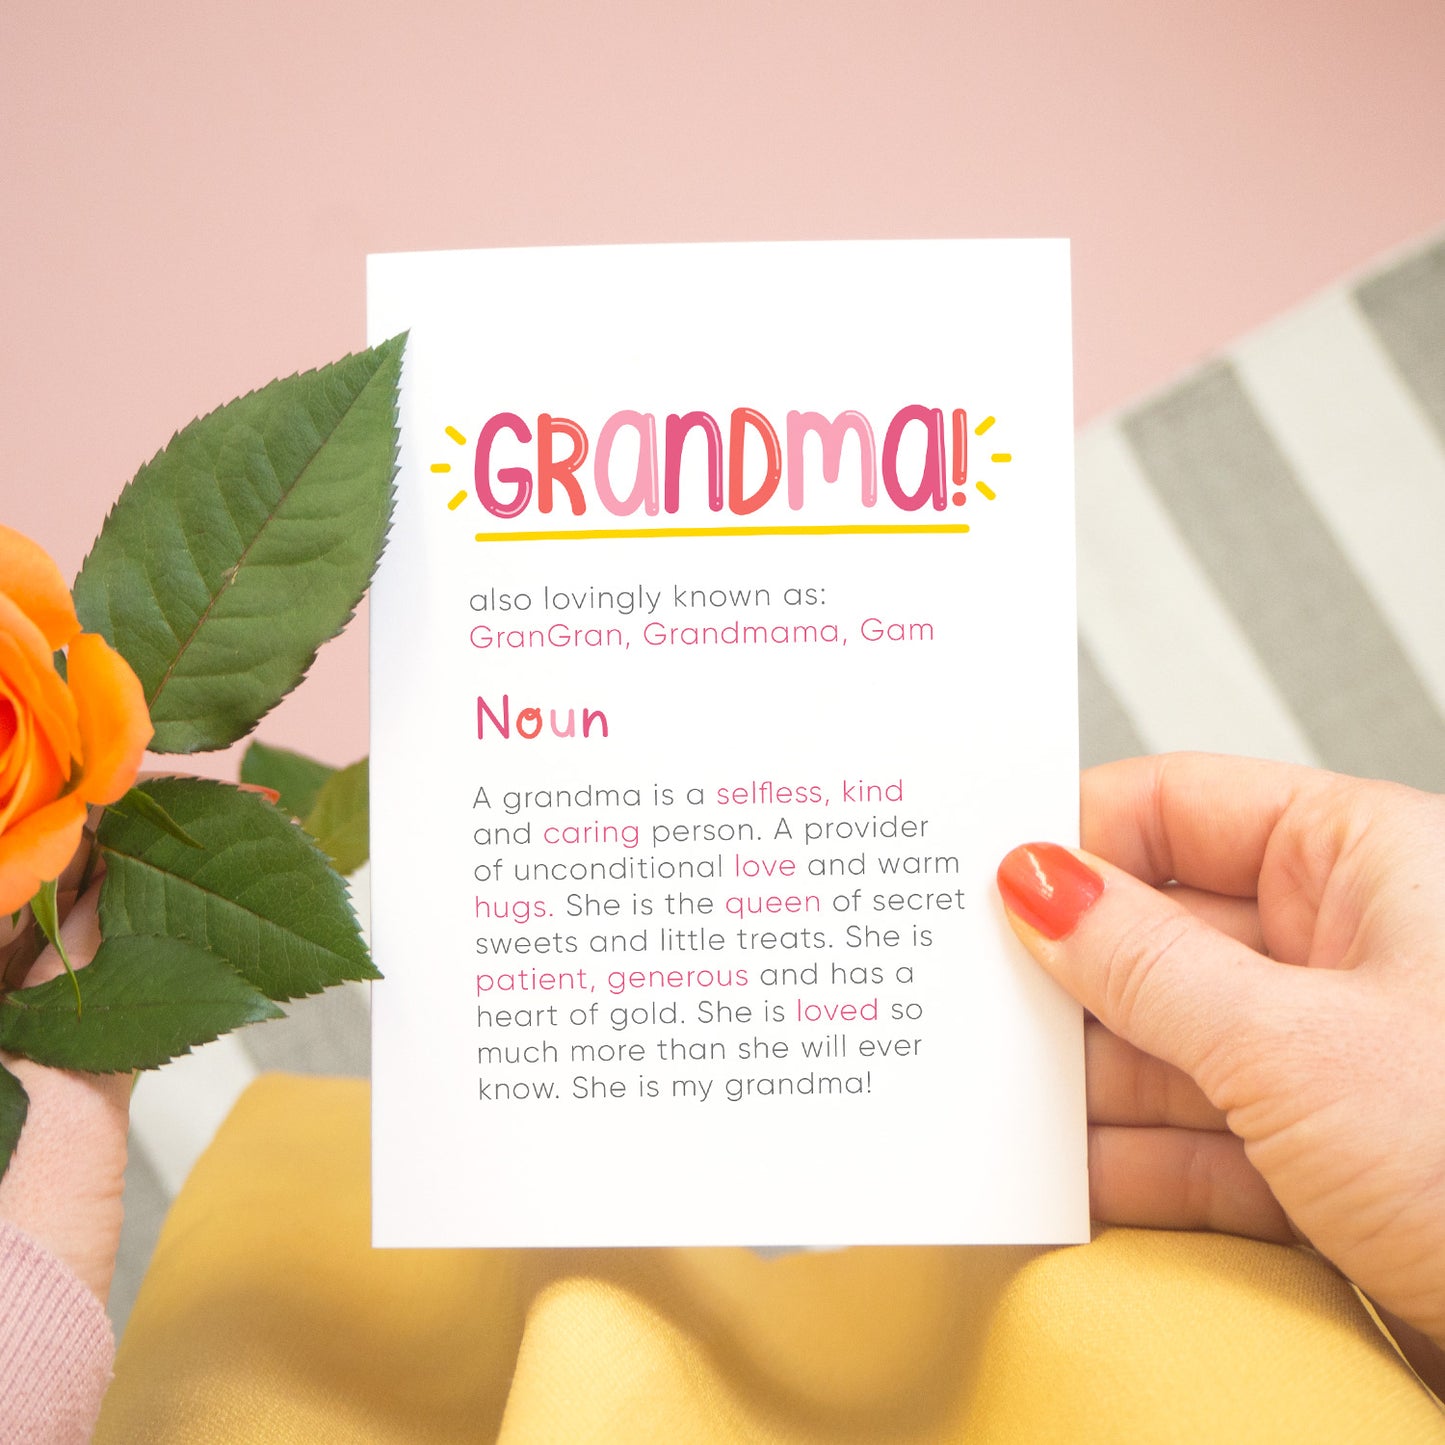 A personalised Grandma dictionary definition card being held over a pink background with a grey and white striped rug, yellow skirt and a single orange rose to the left. The card features hand drawn writing in varying tones of pink and a definition of what a Grandma is with key words highlighted in pink.